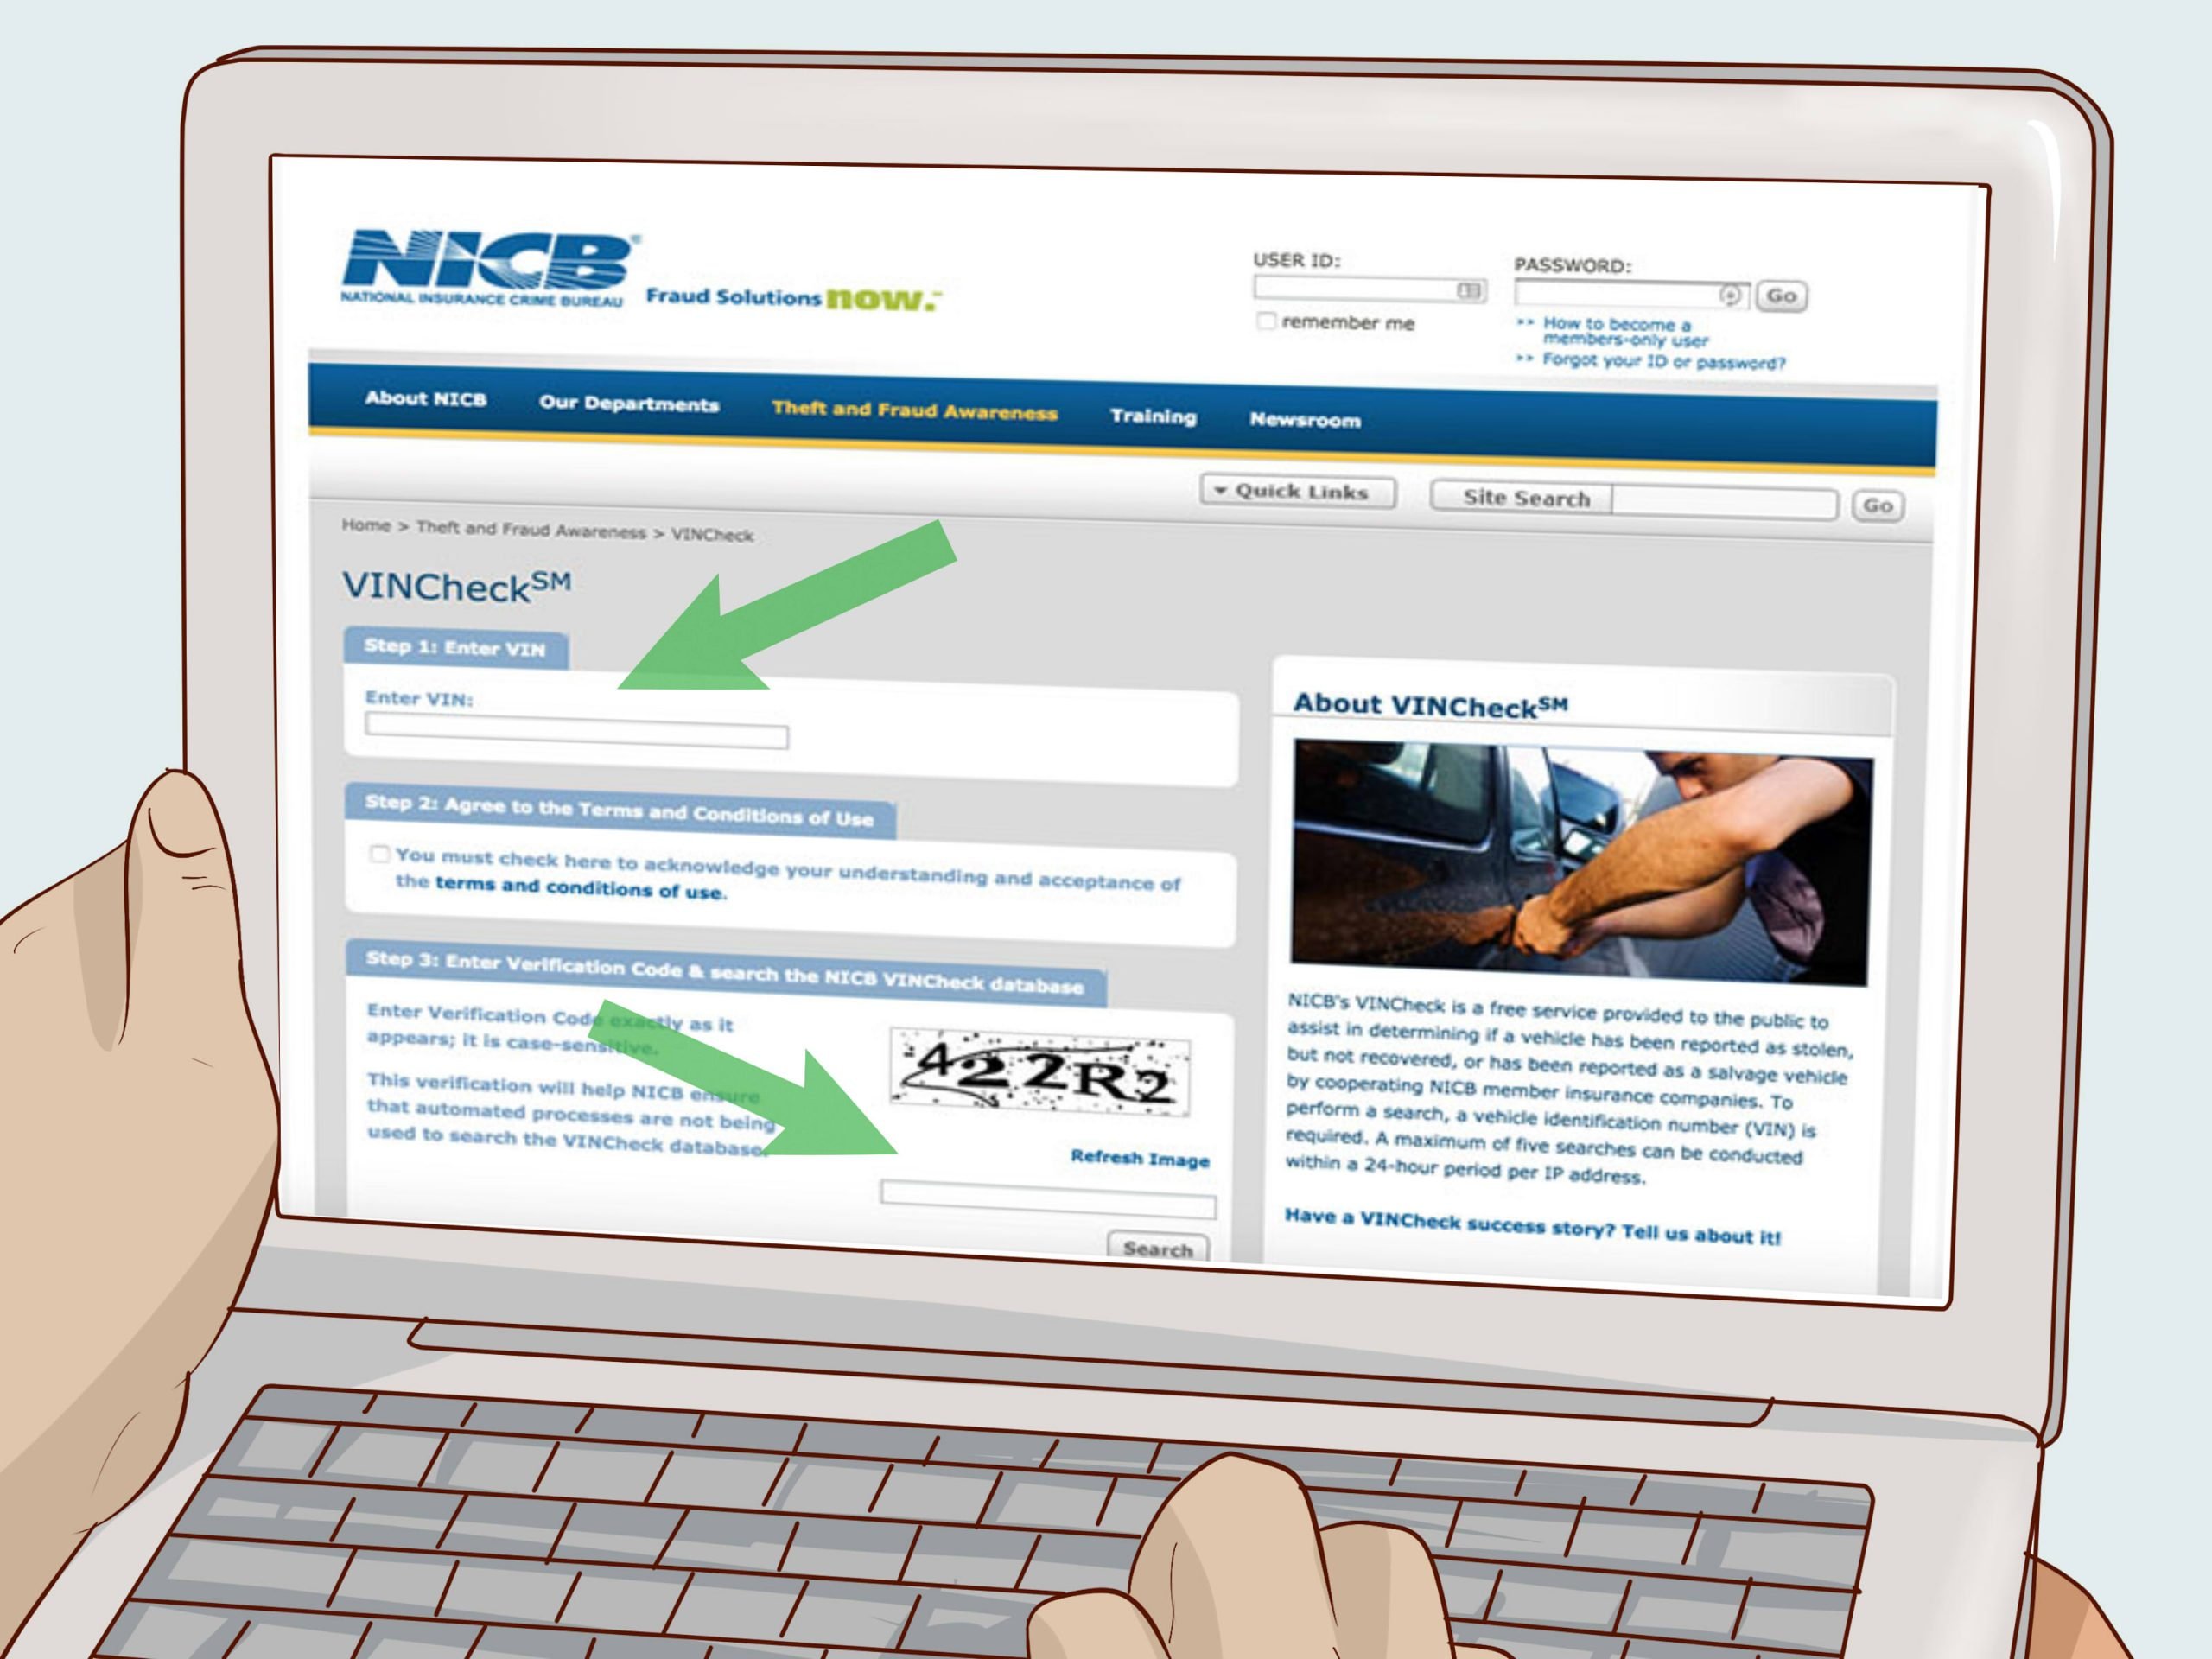 4 Ways to Check Vehicle History for Free